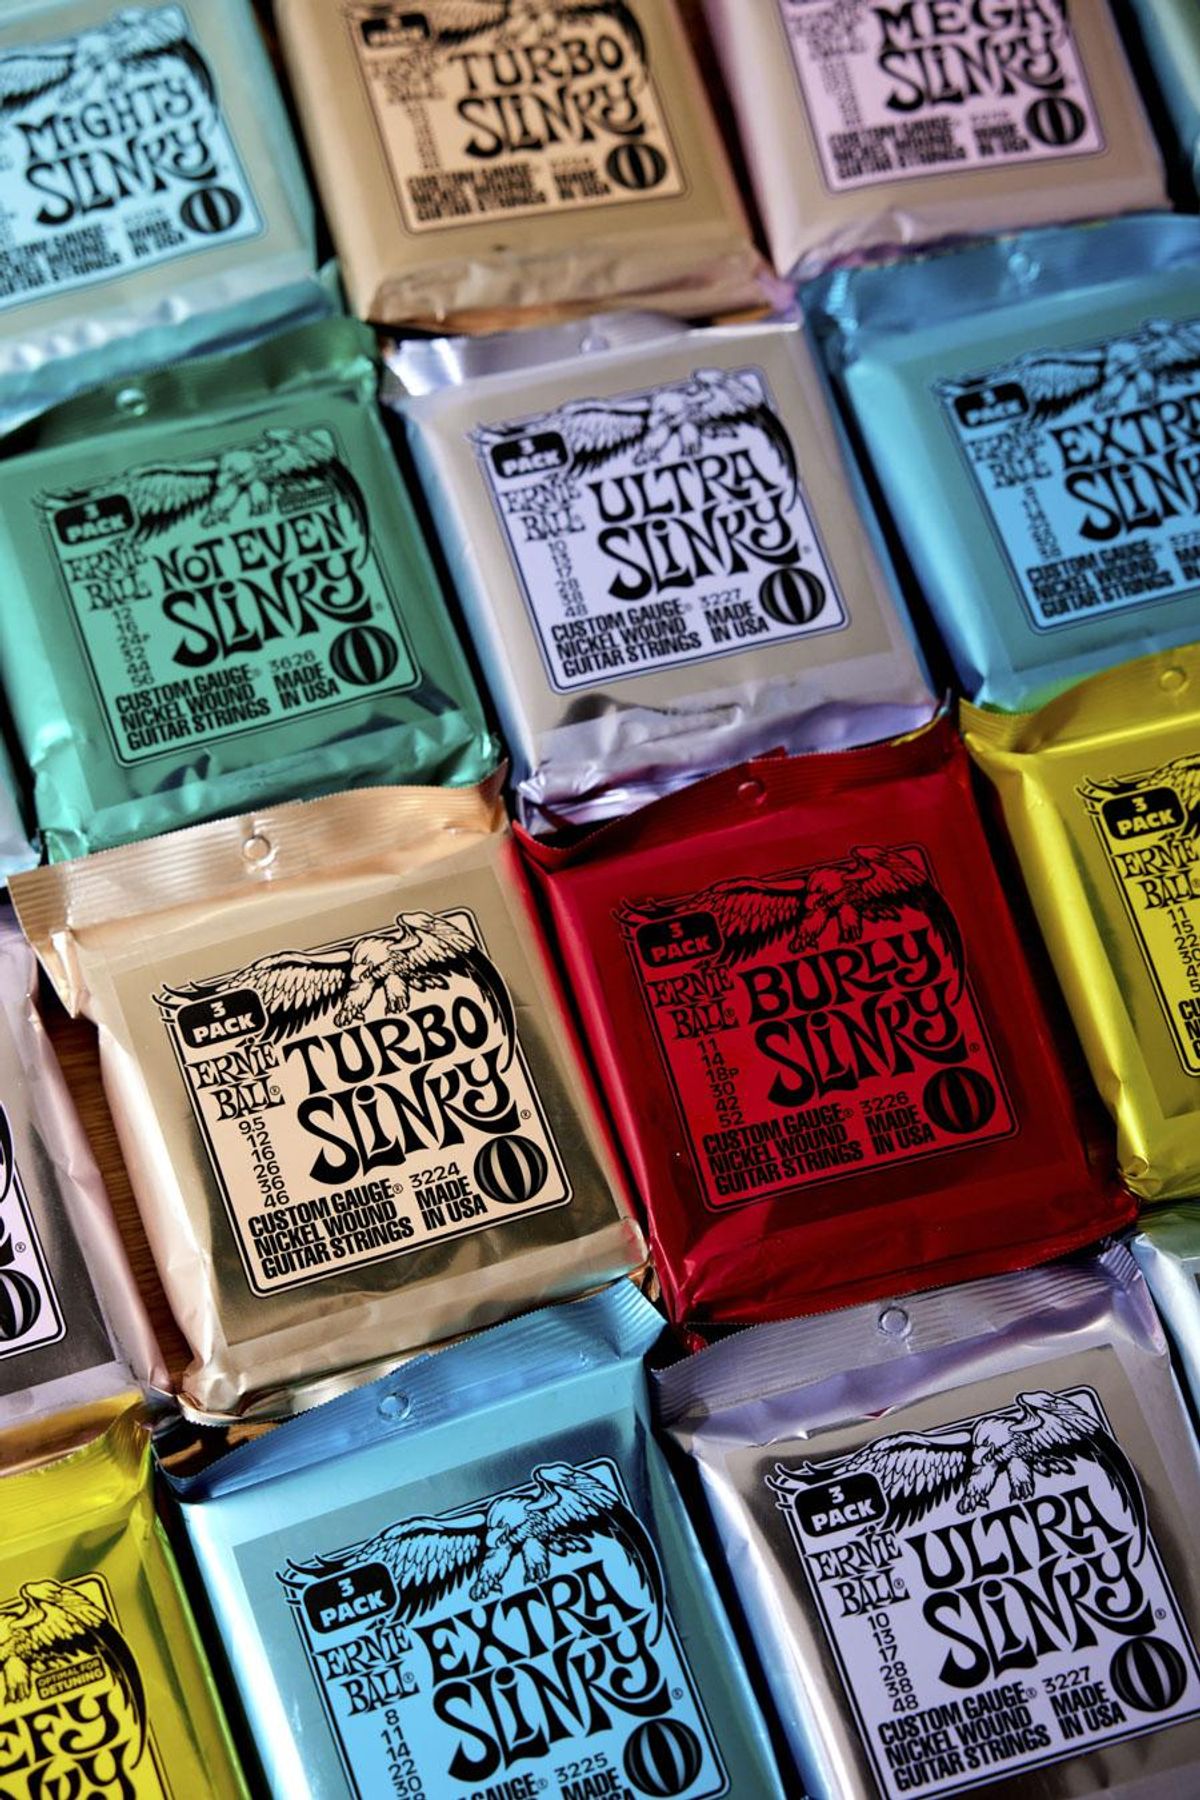 Ernie Ball Introduces 3-Packs of Popular String Sets